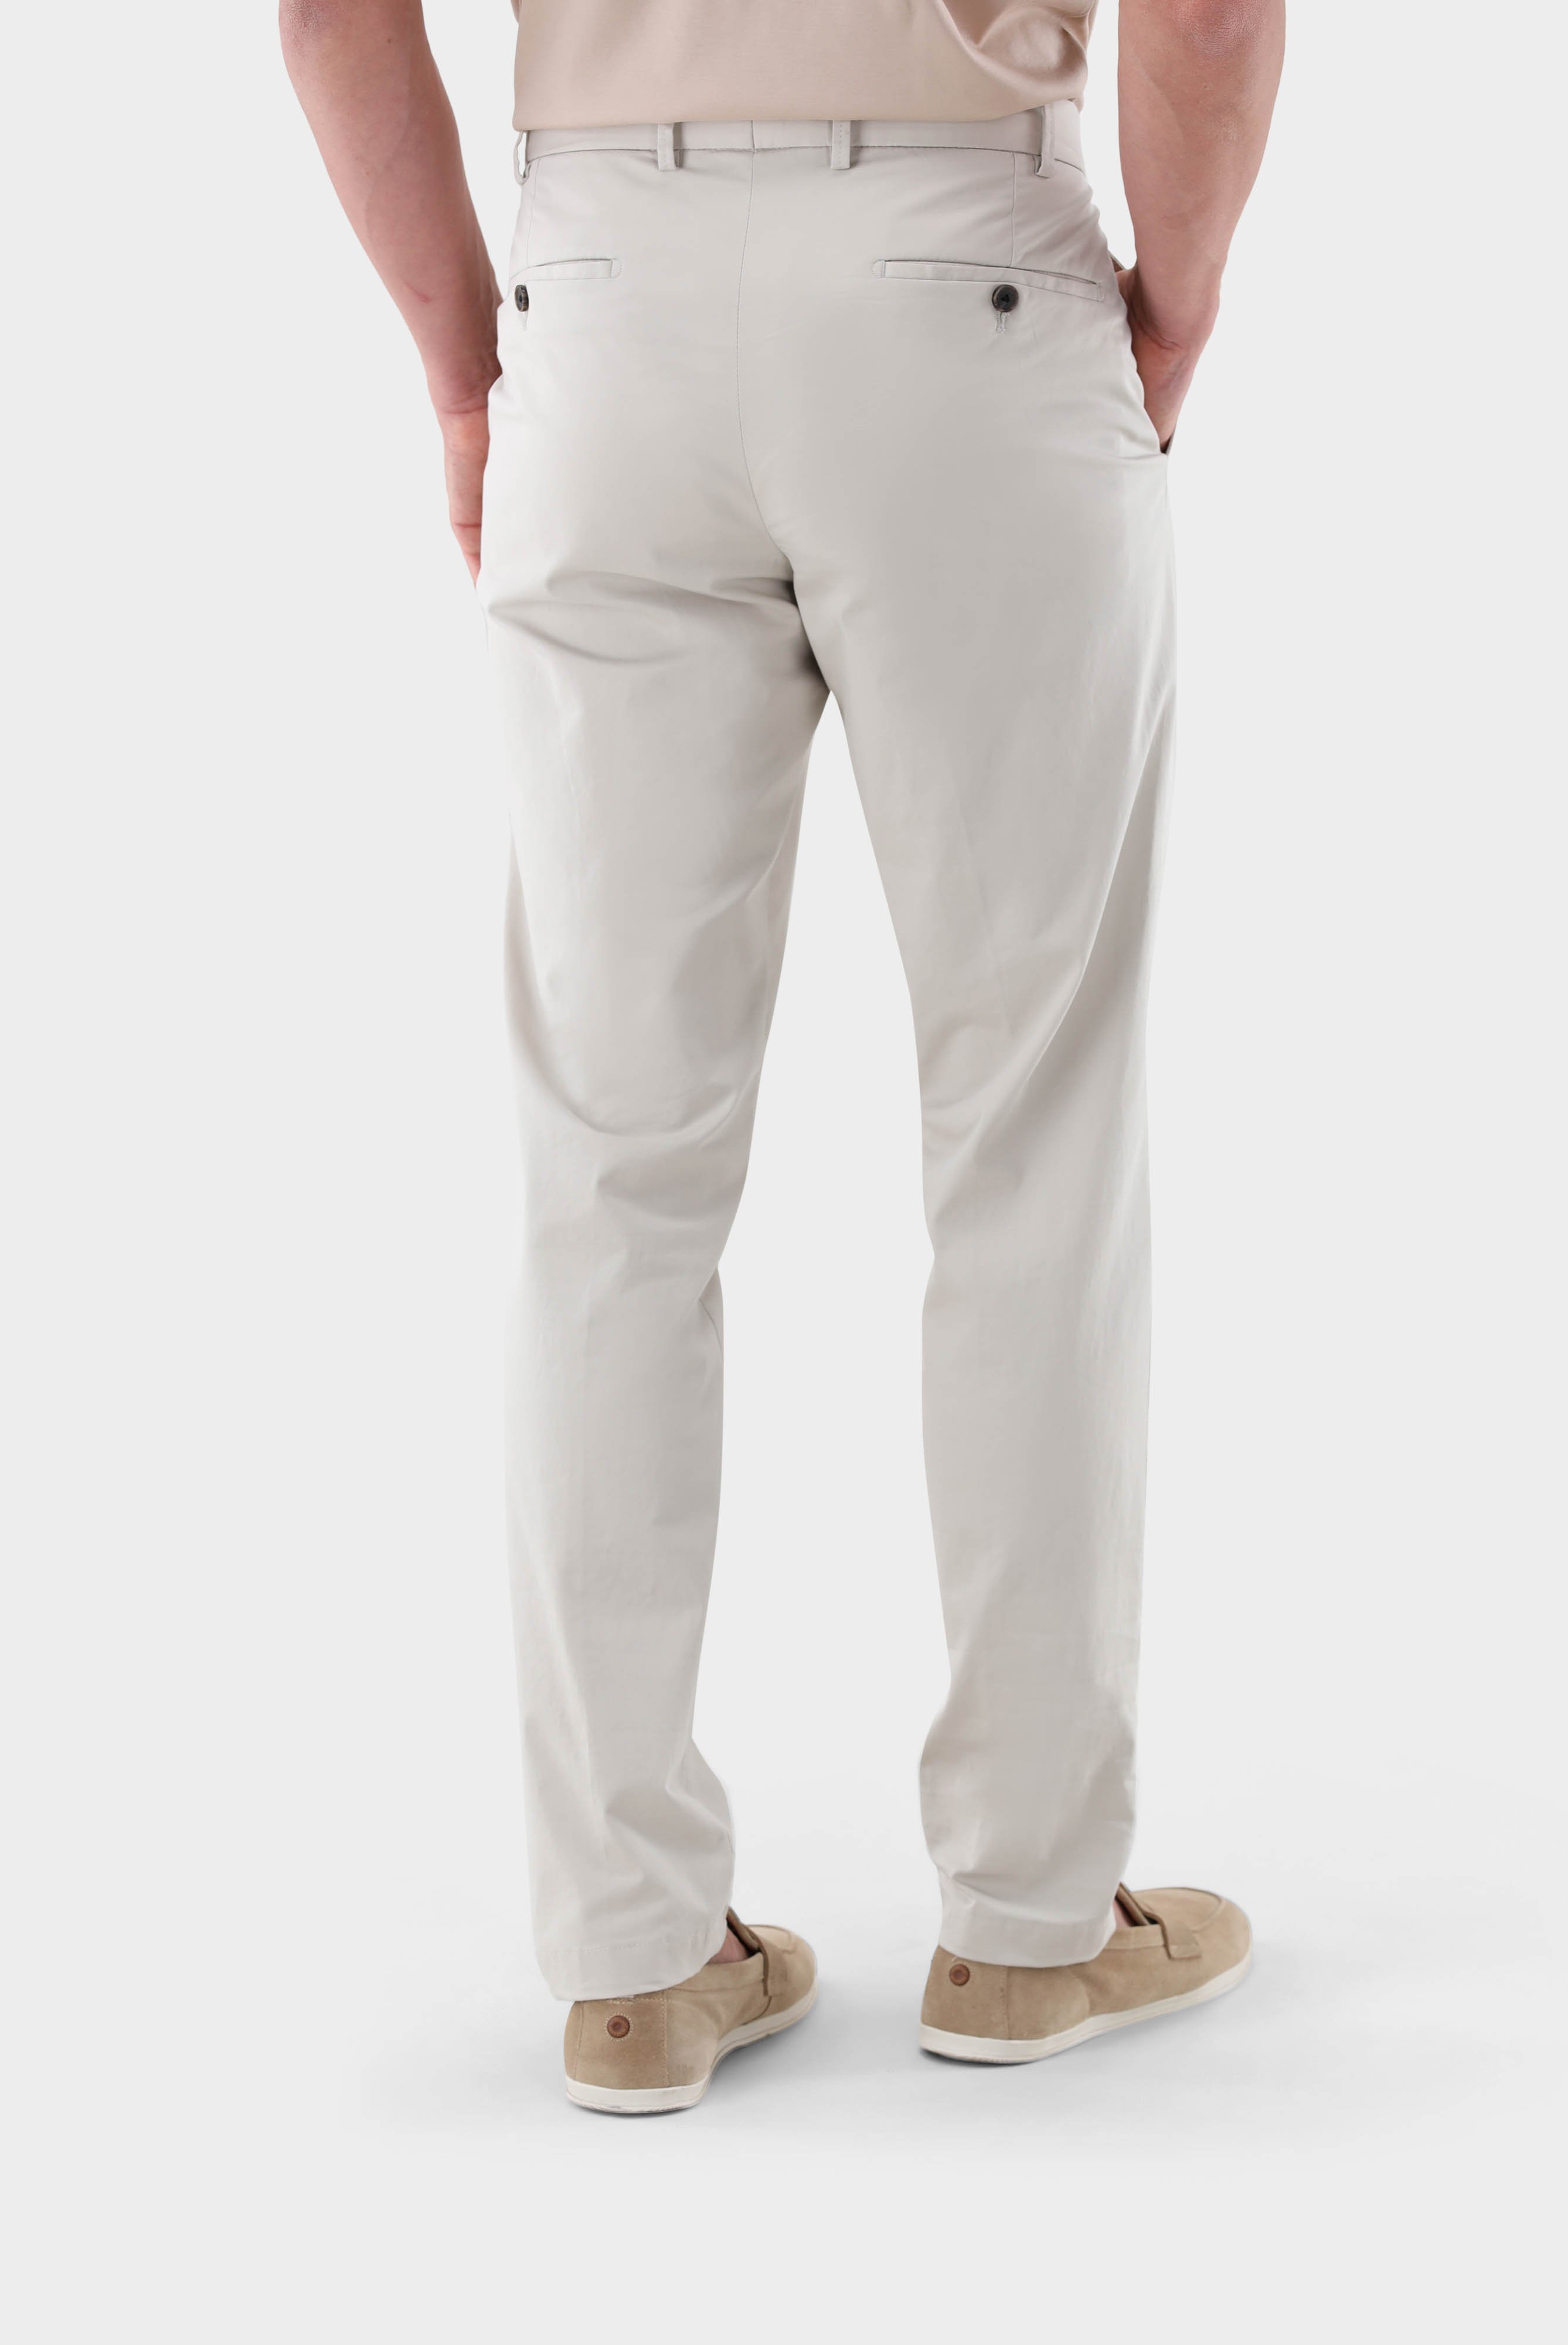 Jeans & Trousers+Cotton with Stretch Tapered Chinos+80.7858..J00151.110.46